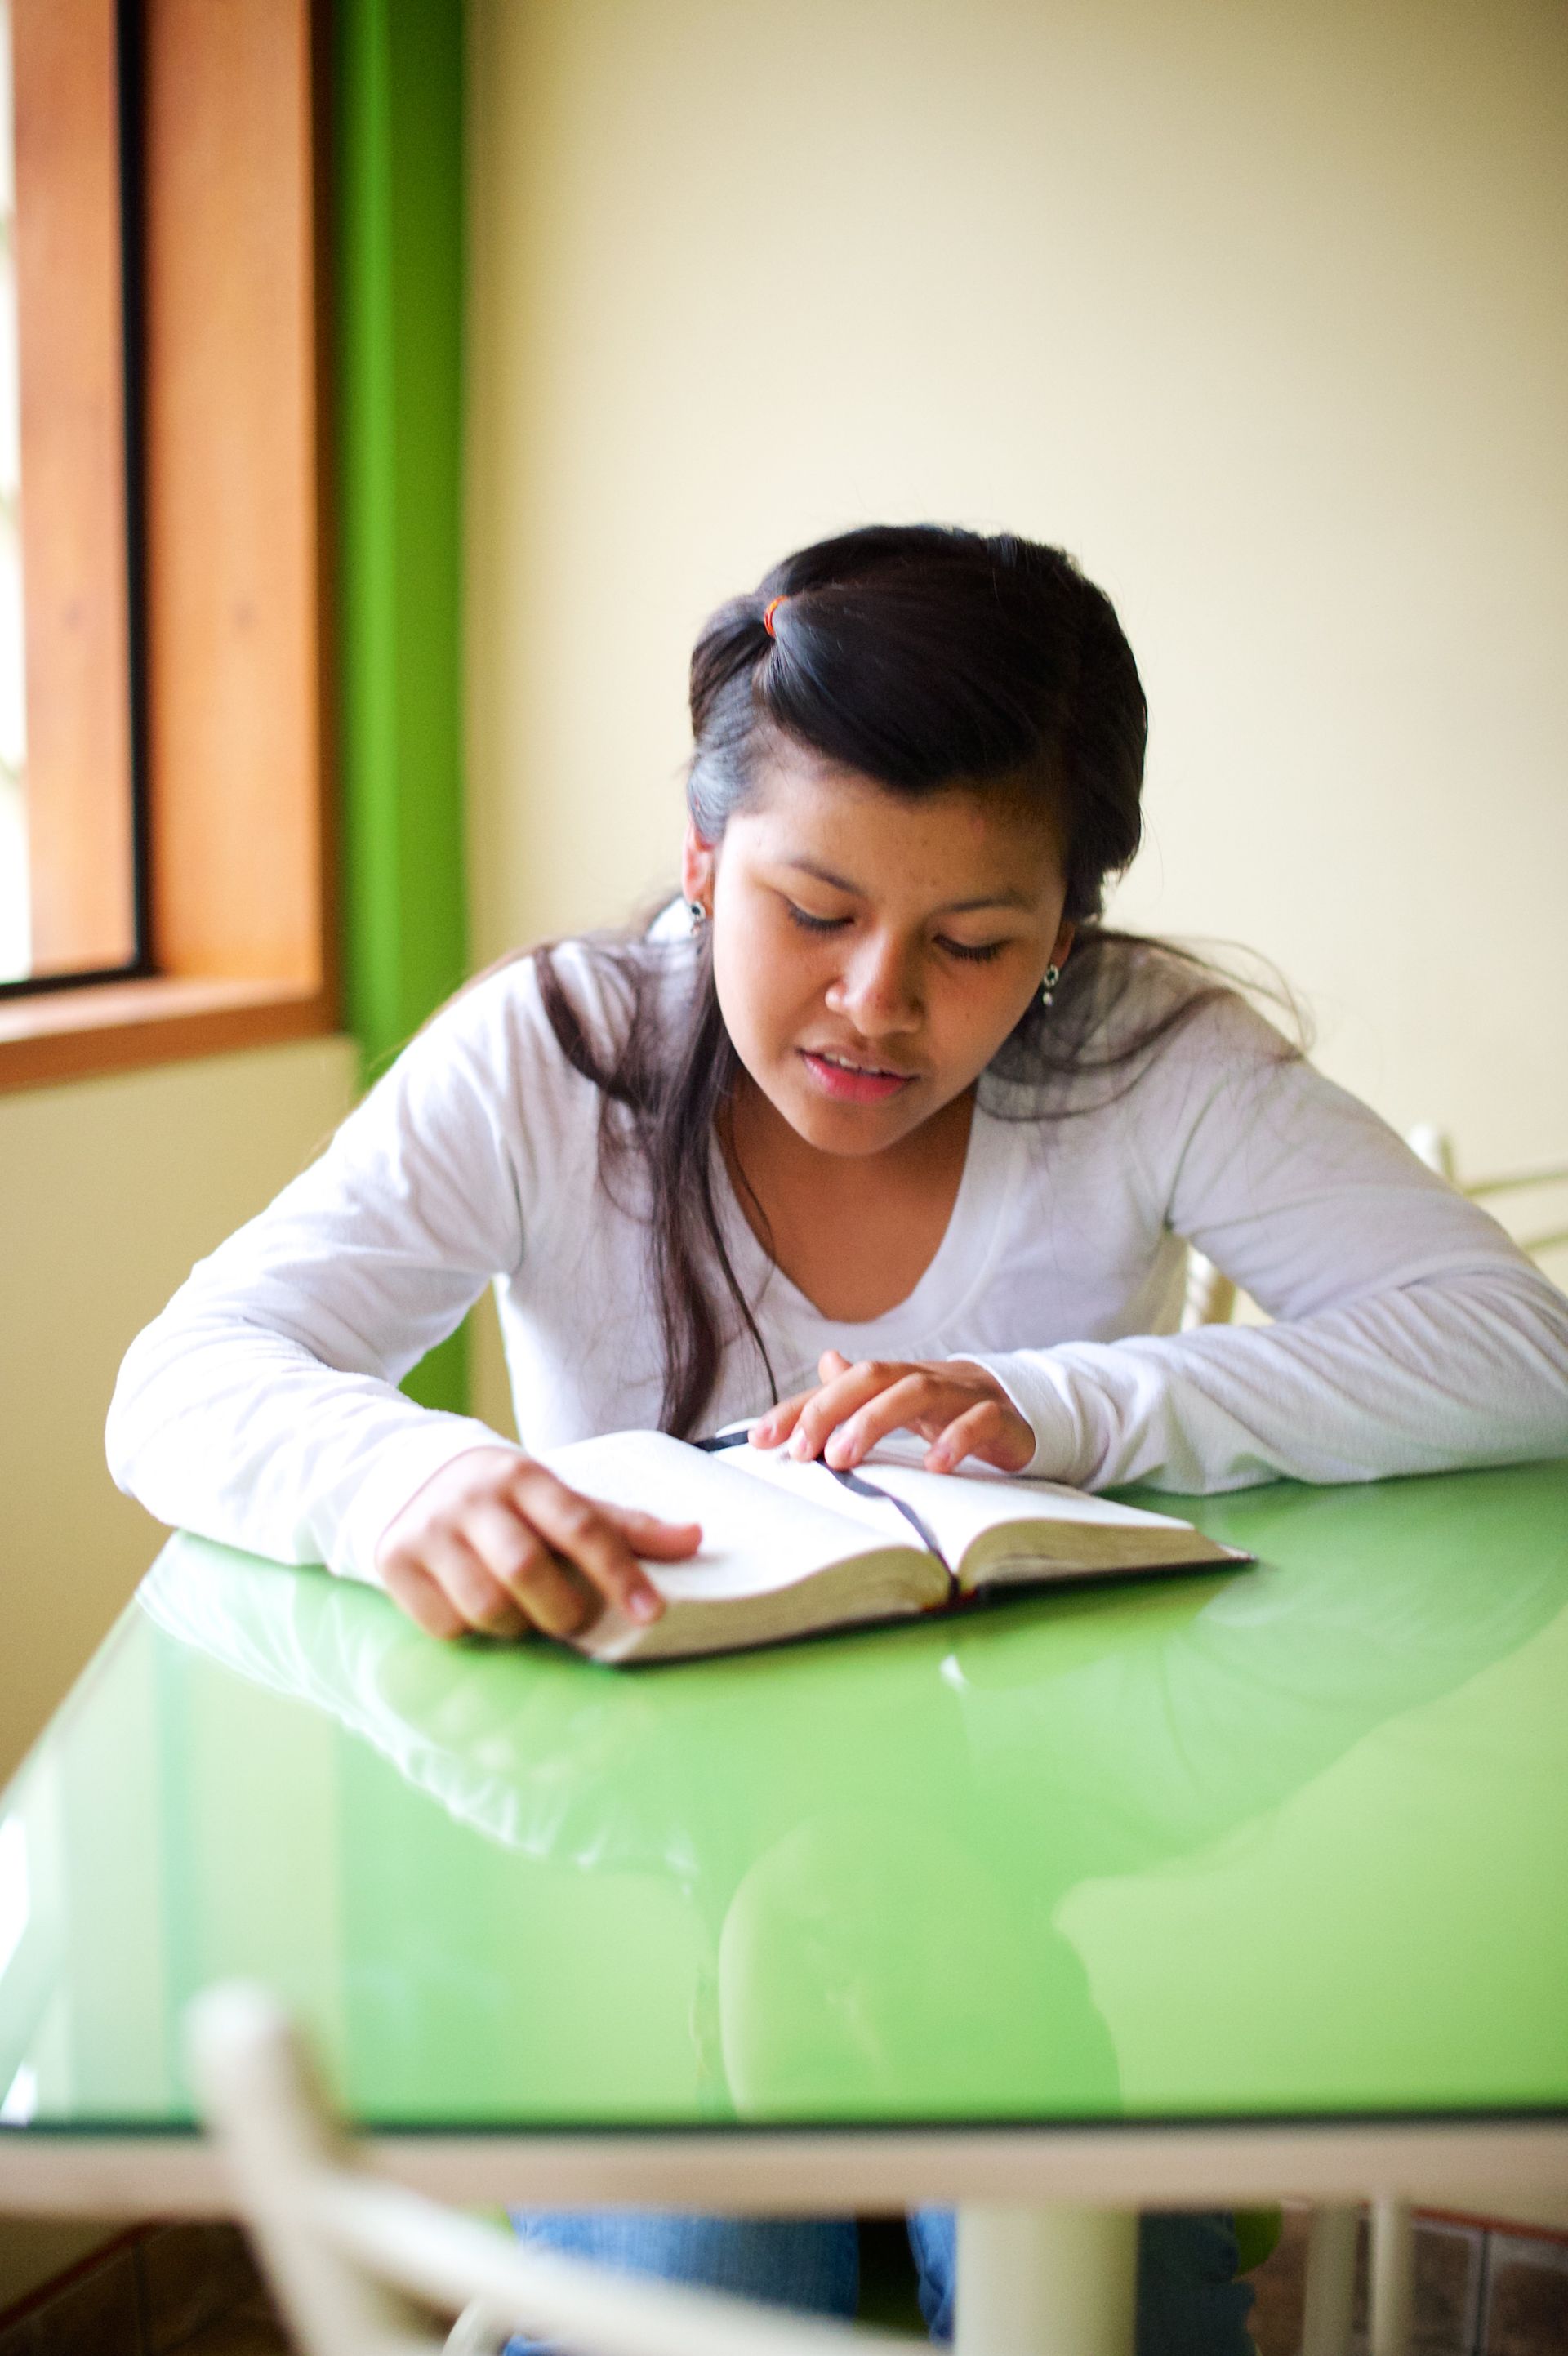 A young woman sitting at a table and reading scriptures.